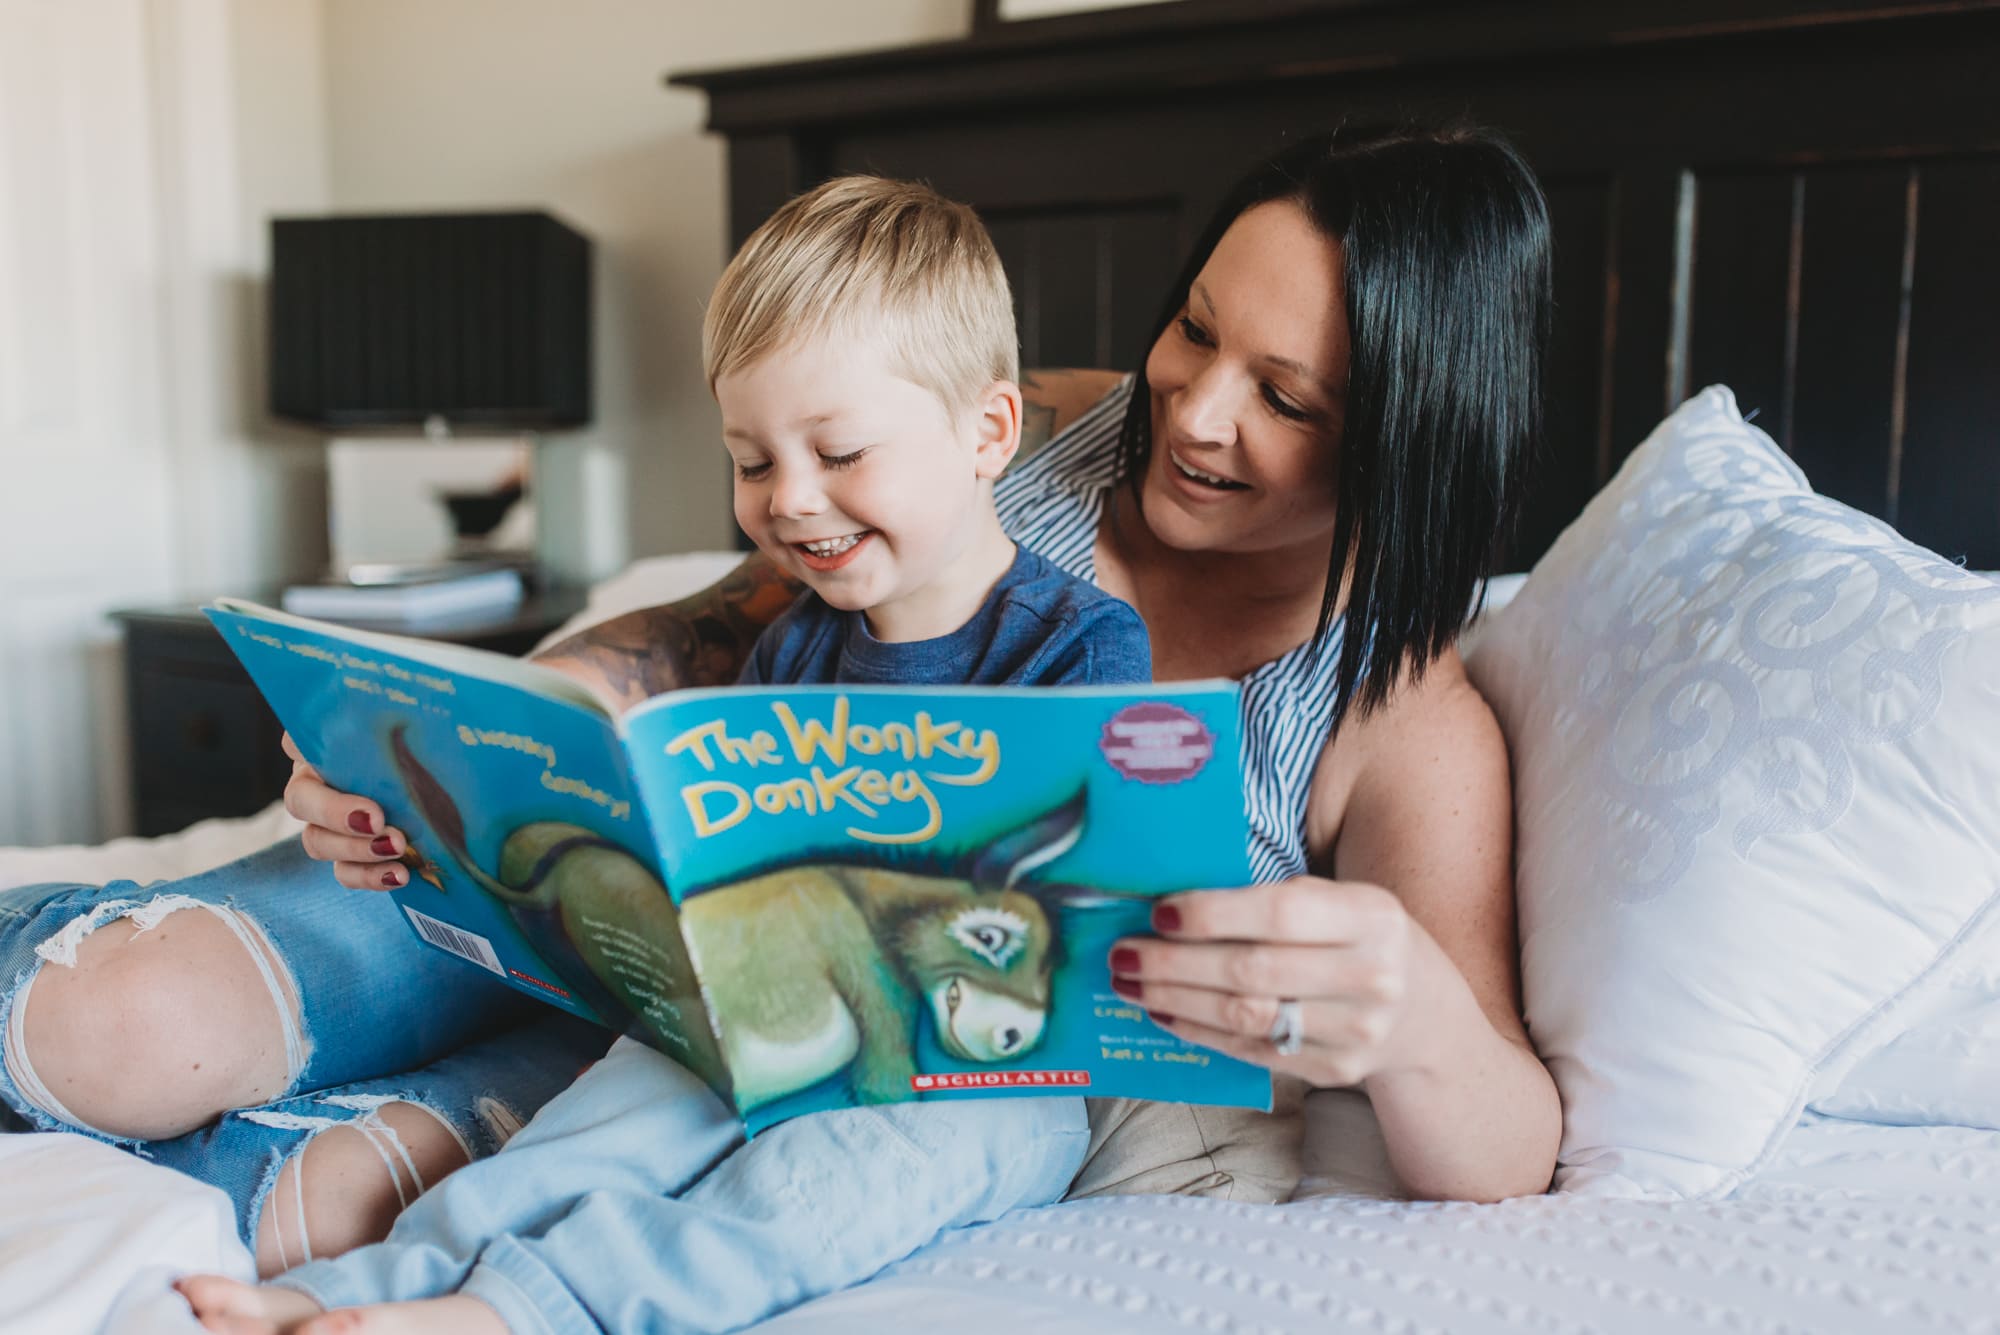 Vancouver Family Photographer shows mom and toddler reading book during Vancouver family photo session